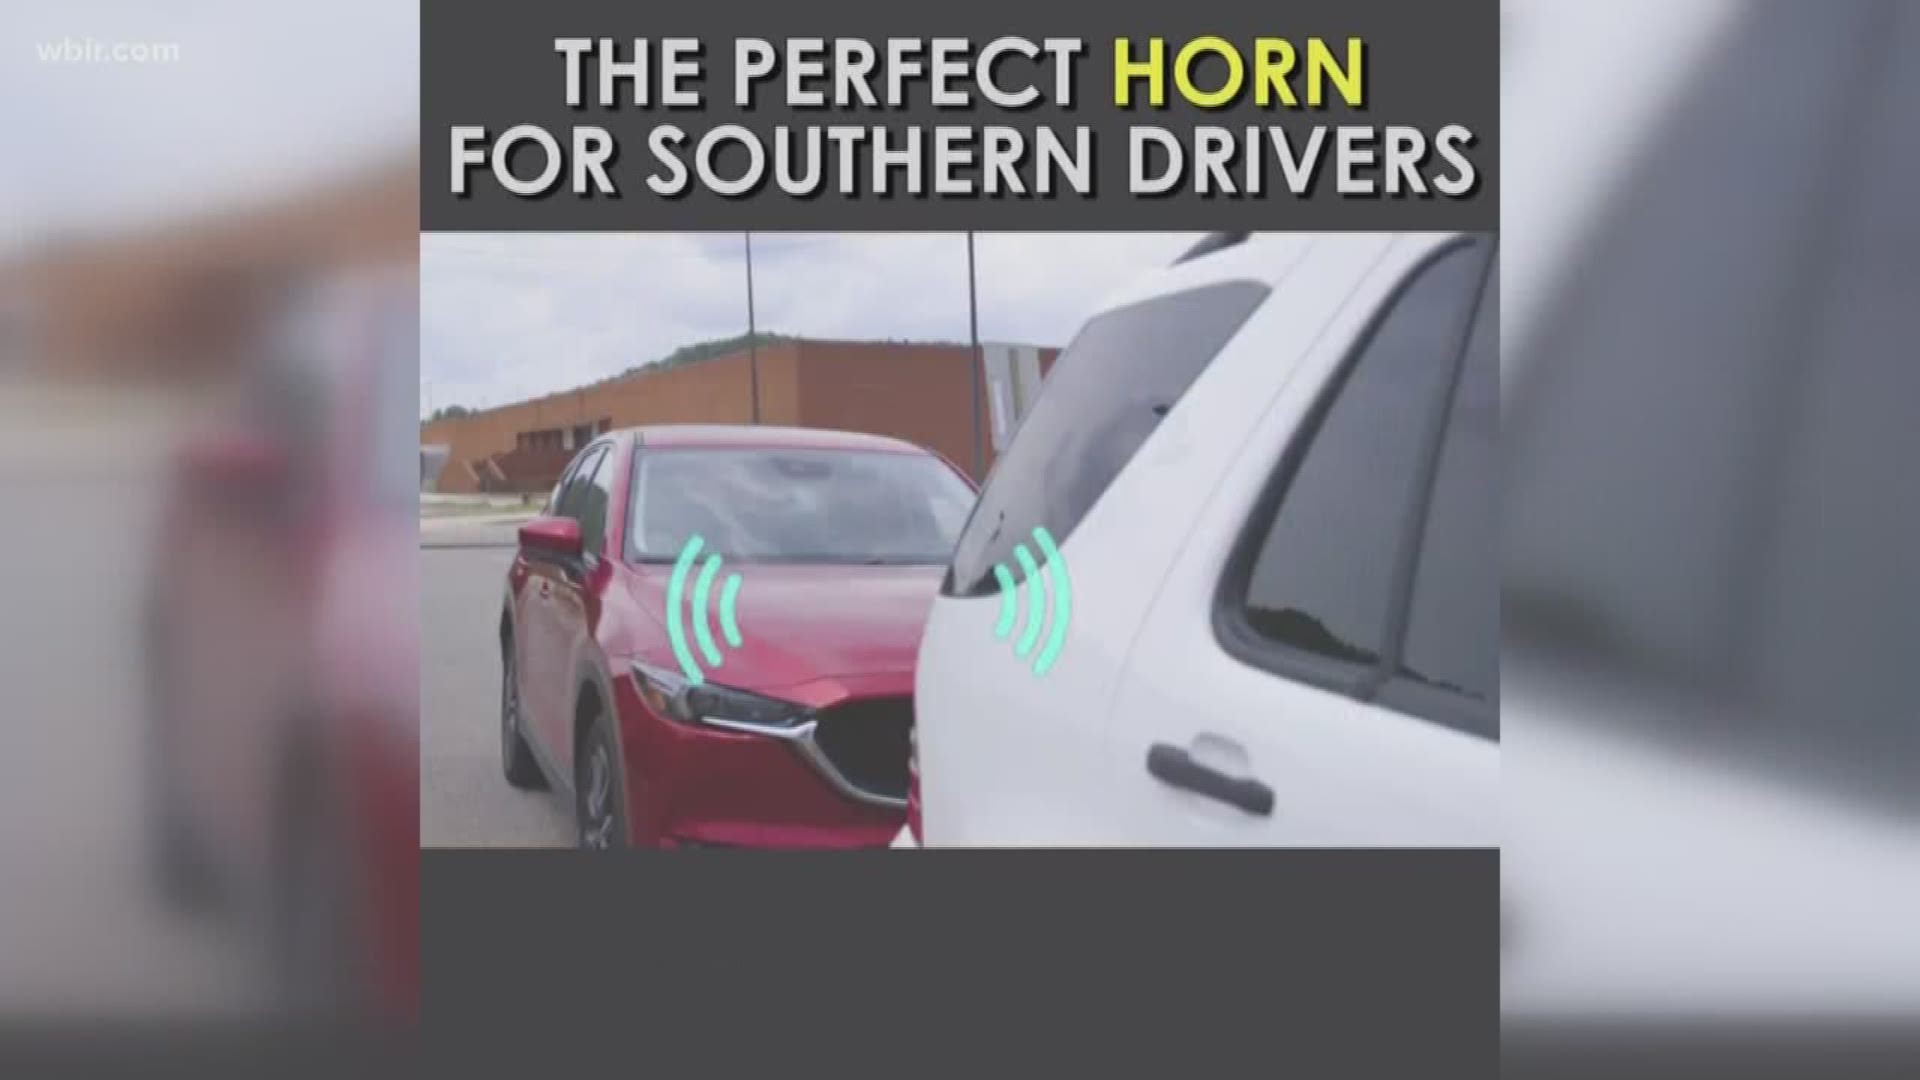 A new study ranked Tennessee driver among the worst in the nation, but the folks at "So True, Y'all," comedy think we might just be too nice.